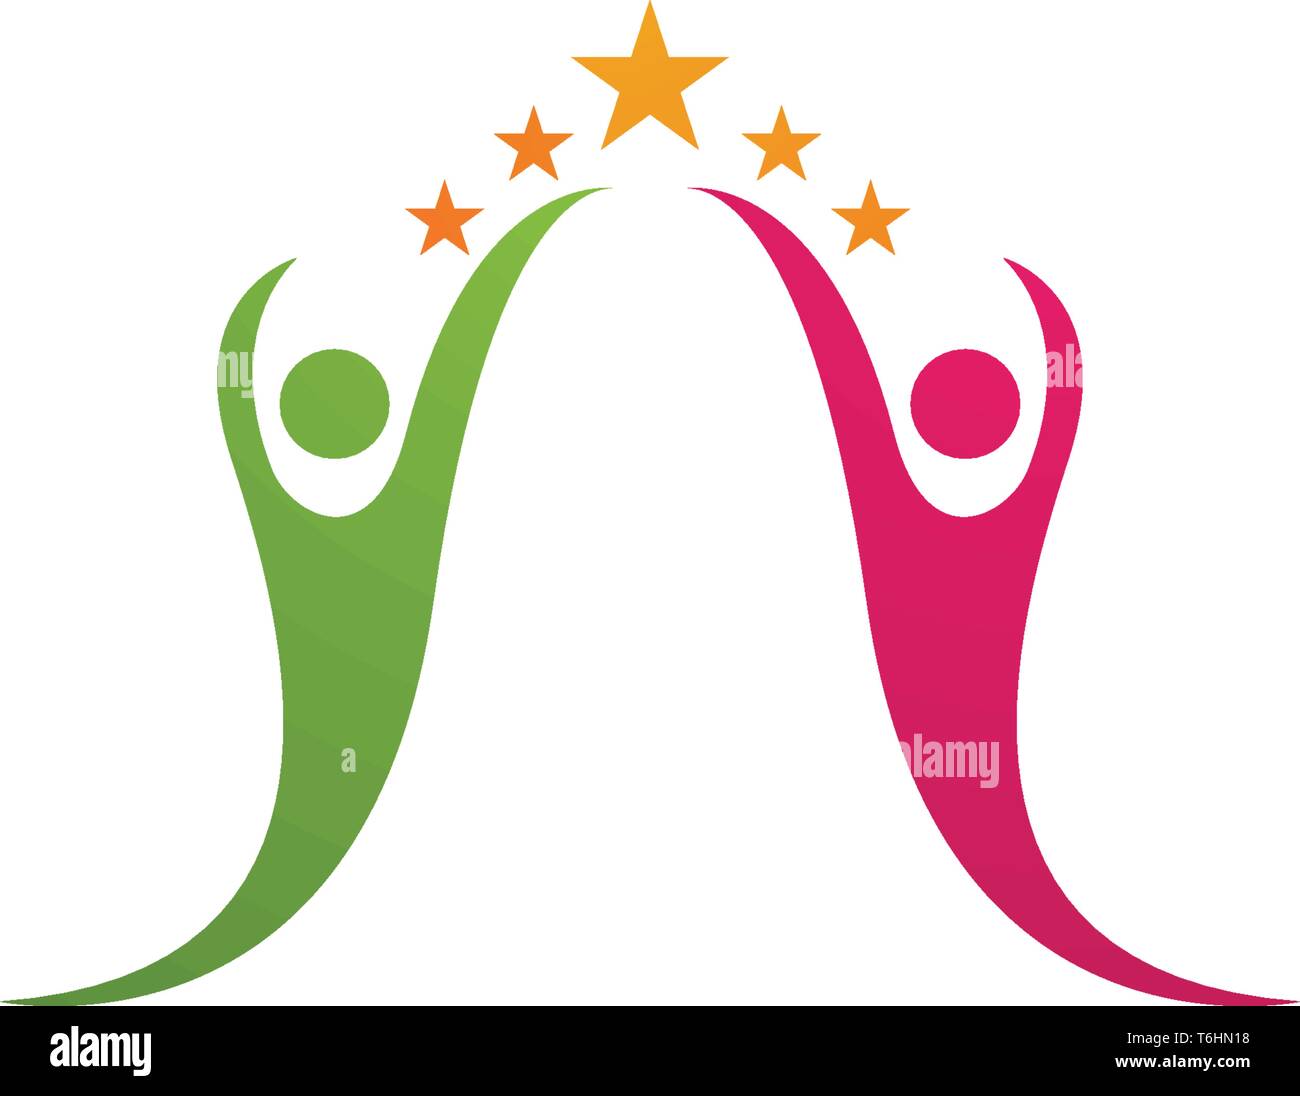 community and Adoption care Logo template vector icon Stock Vector